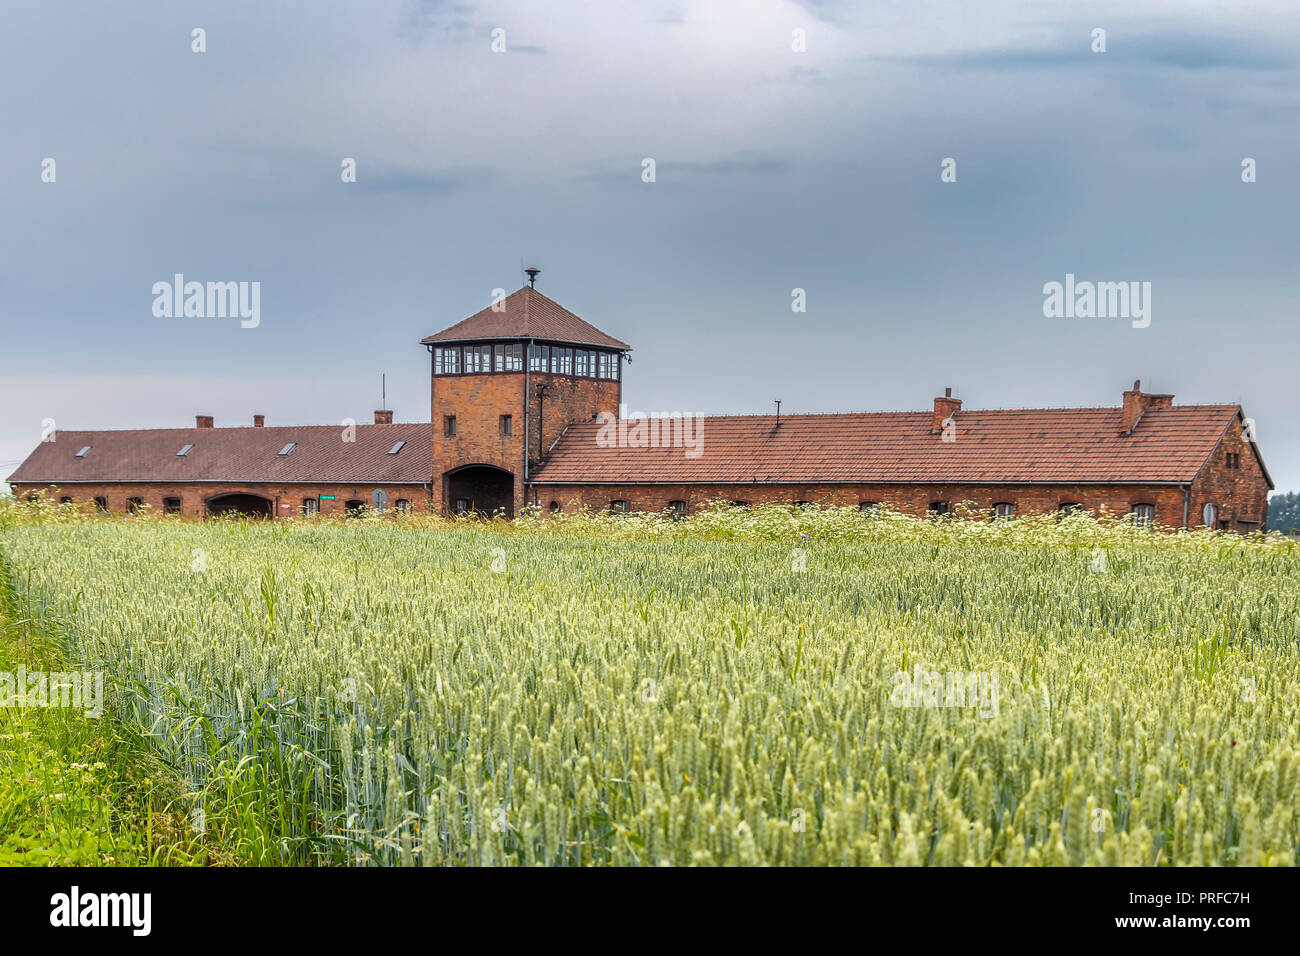 Inside Auschwitz ii Birkenau  concentration and extermination camp. Main building  built and operated by the Third Reich in German-occupied Poland dur Stock Photo